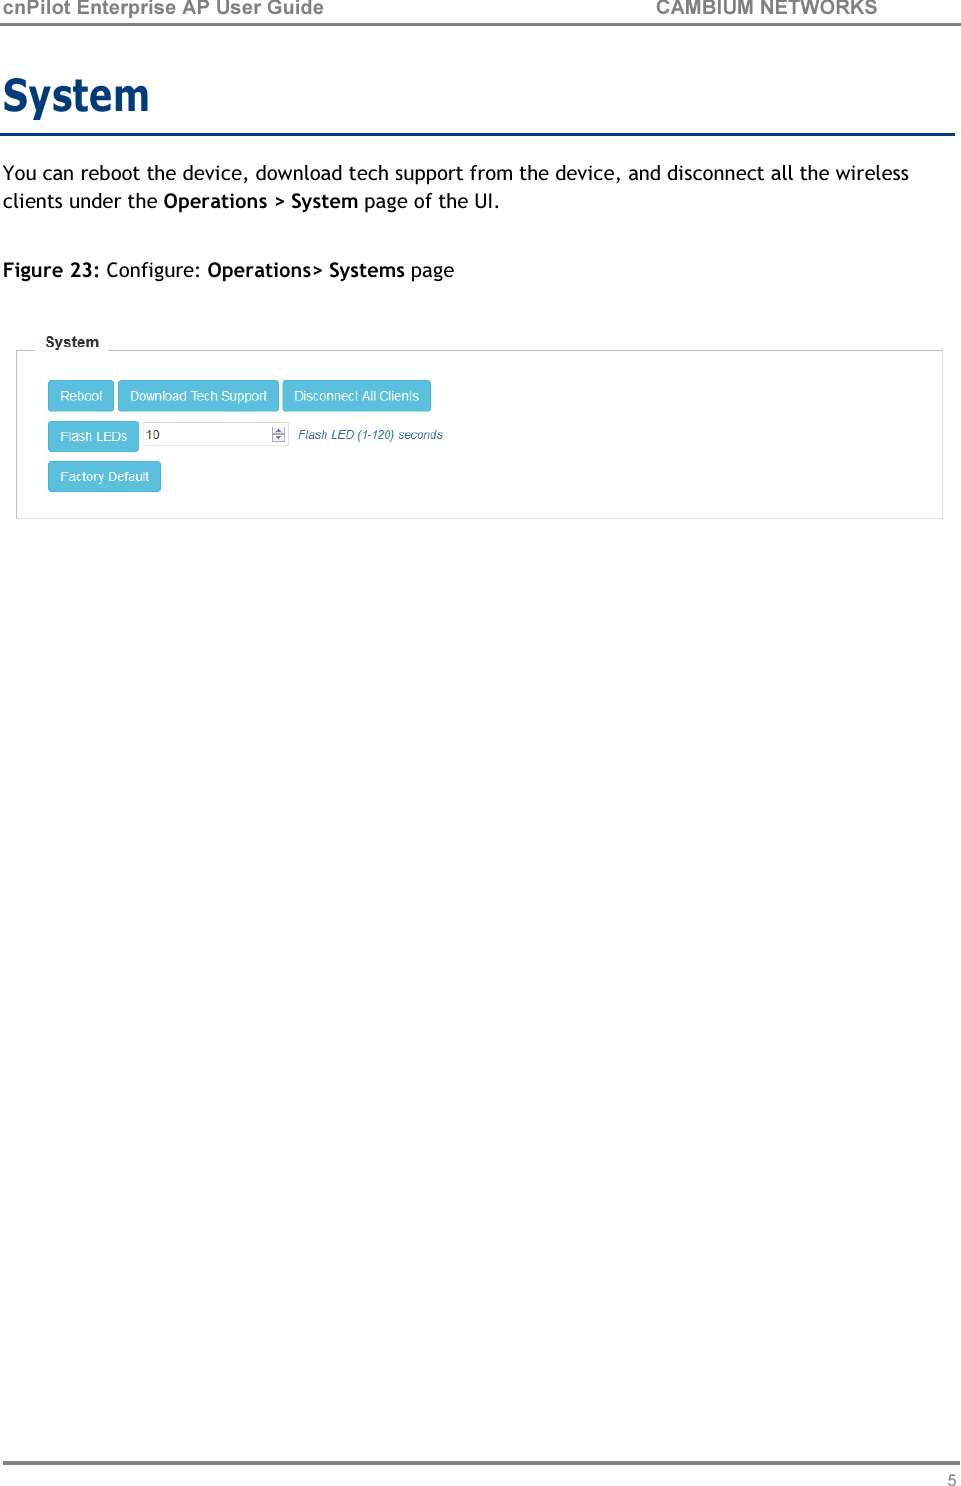 59 cnPilot Enterprise AP User Guide CAMBIUM NETWORKS    System  You can reboot the device, download tech support from the device, and disconnect all the wireless clients under the Operations &gt; System page of the UI.  Figure 23: Configure: Operations&gt; Systems page   